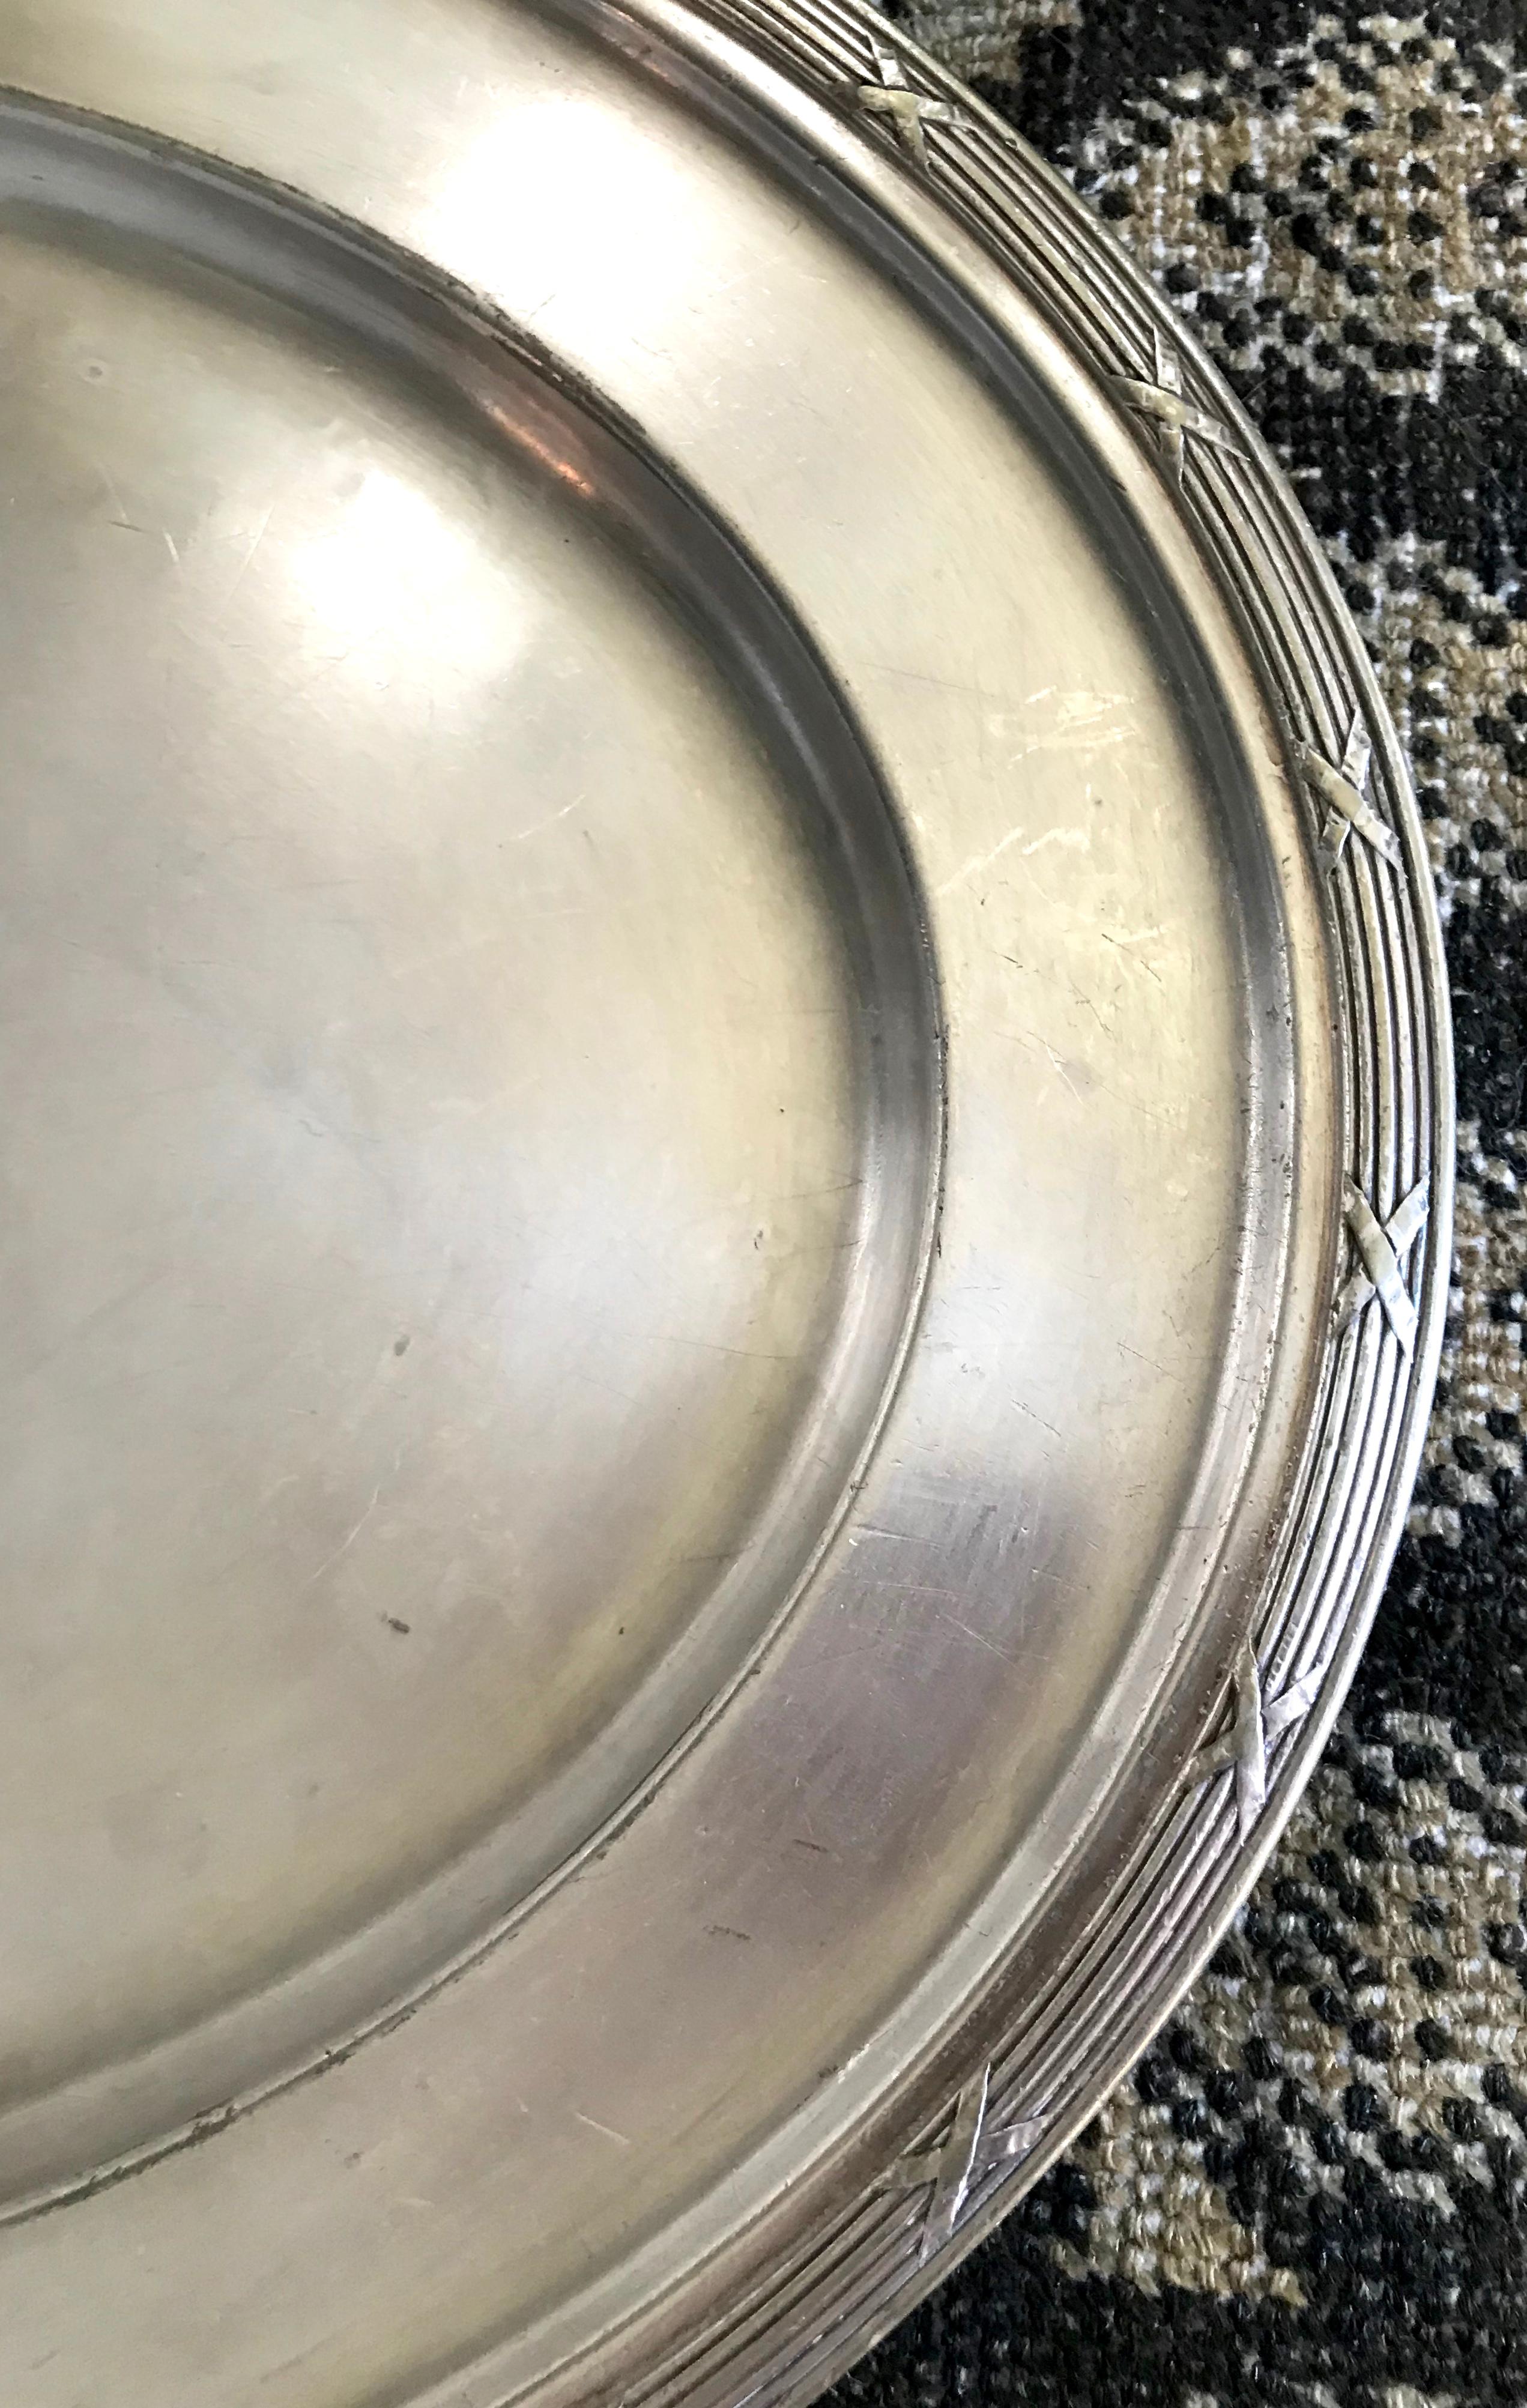 Savoy Plaza large silver tray. Louis XVI style large oval platter / tray with neoclassical banded reed border. From the famed French style hotel overlooking the Grand Army Plaza on Fifth Avenue designed by McKim Mead & White only to be replaced by